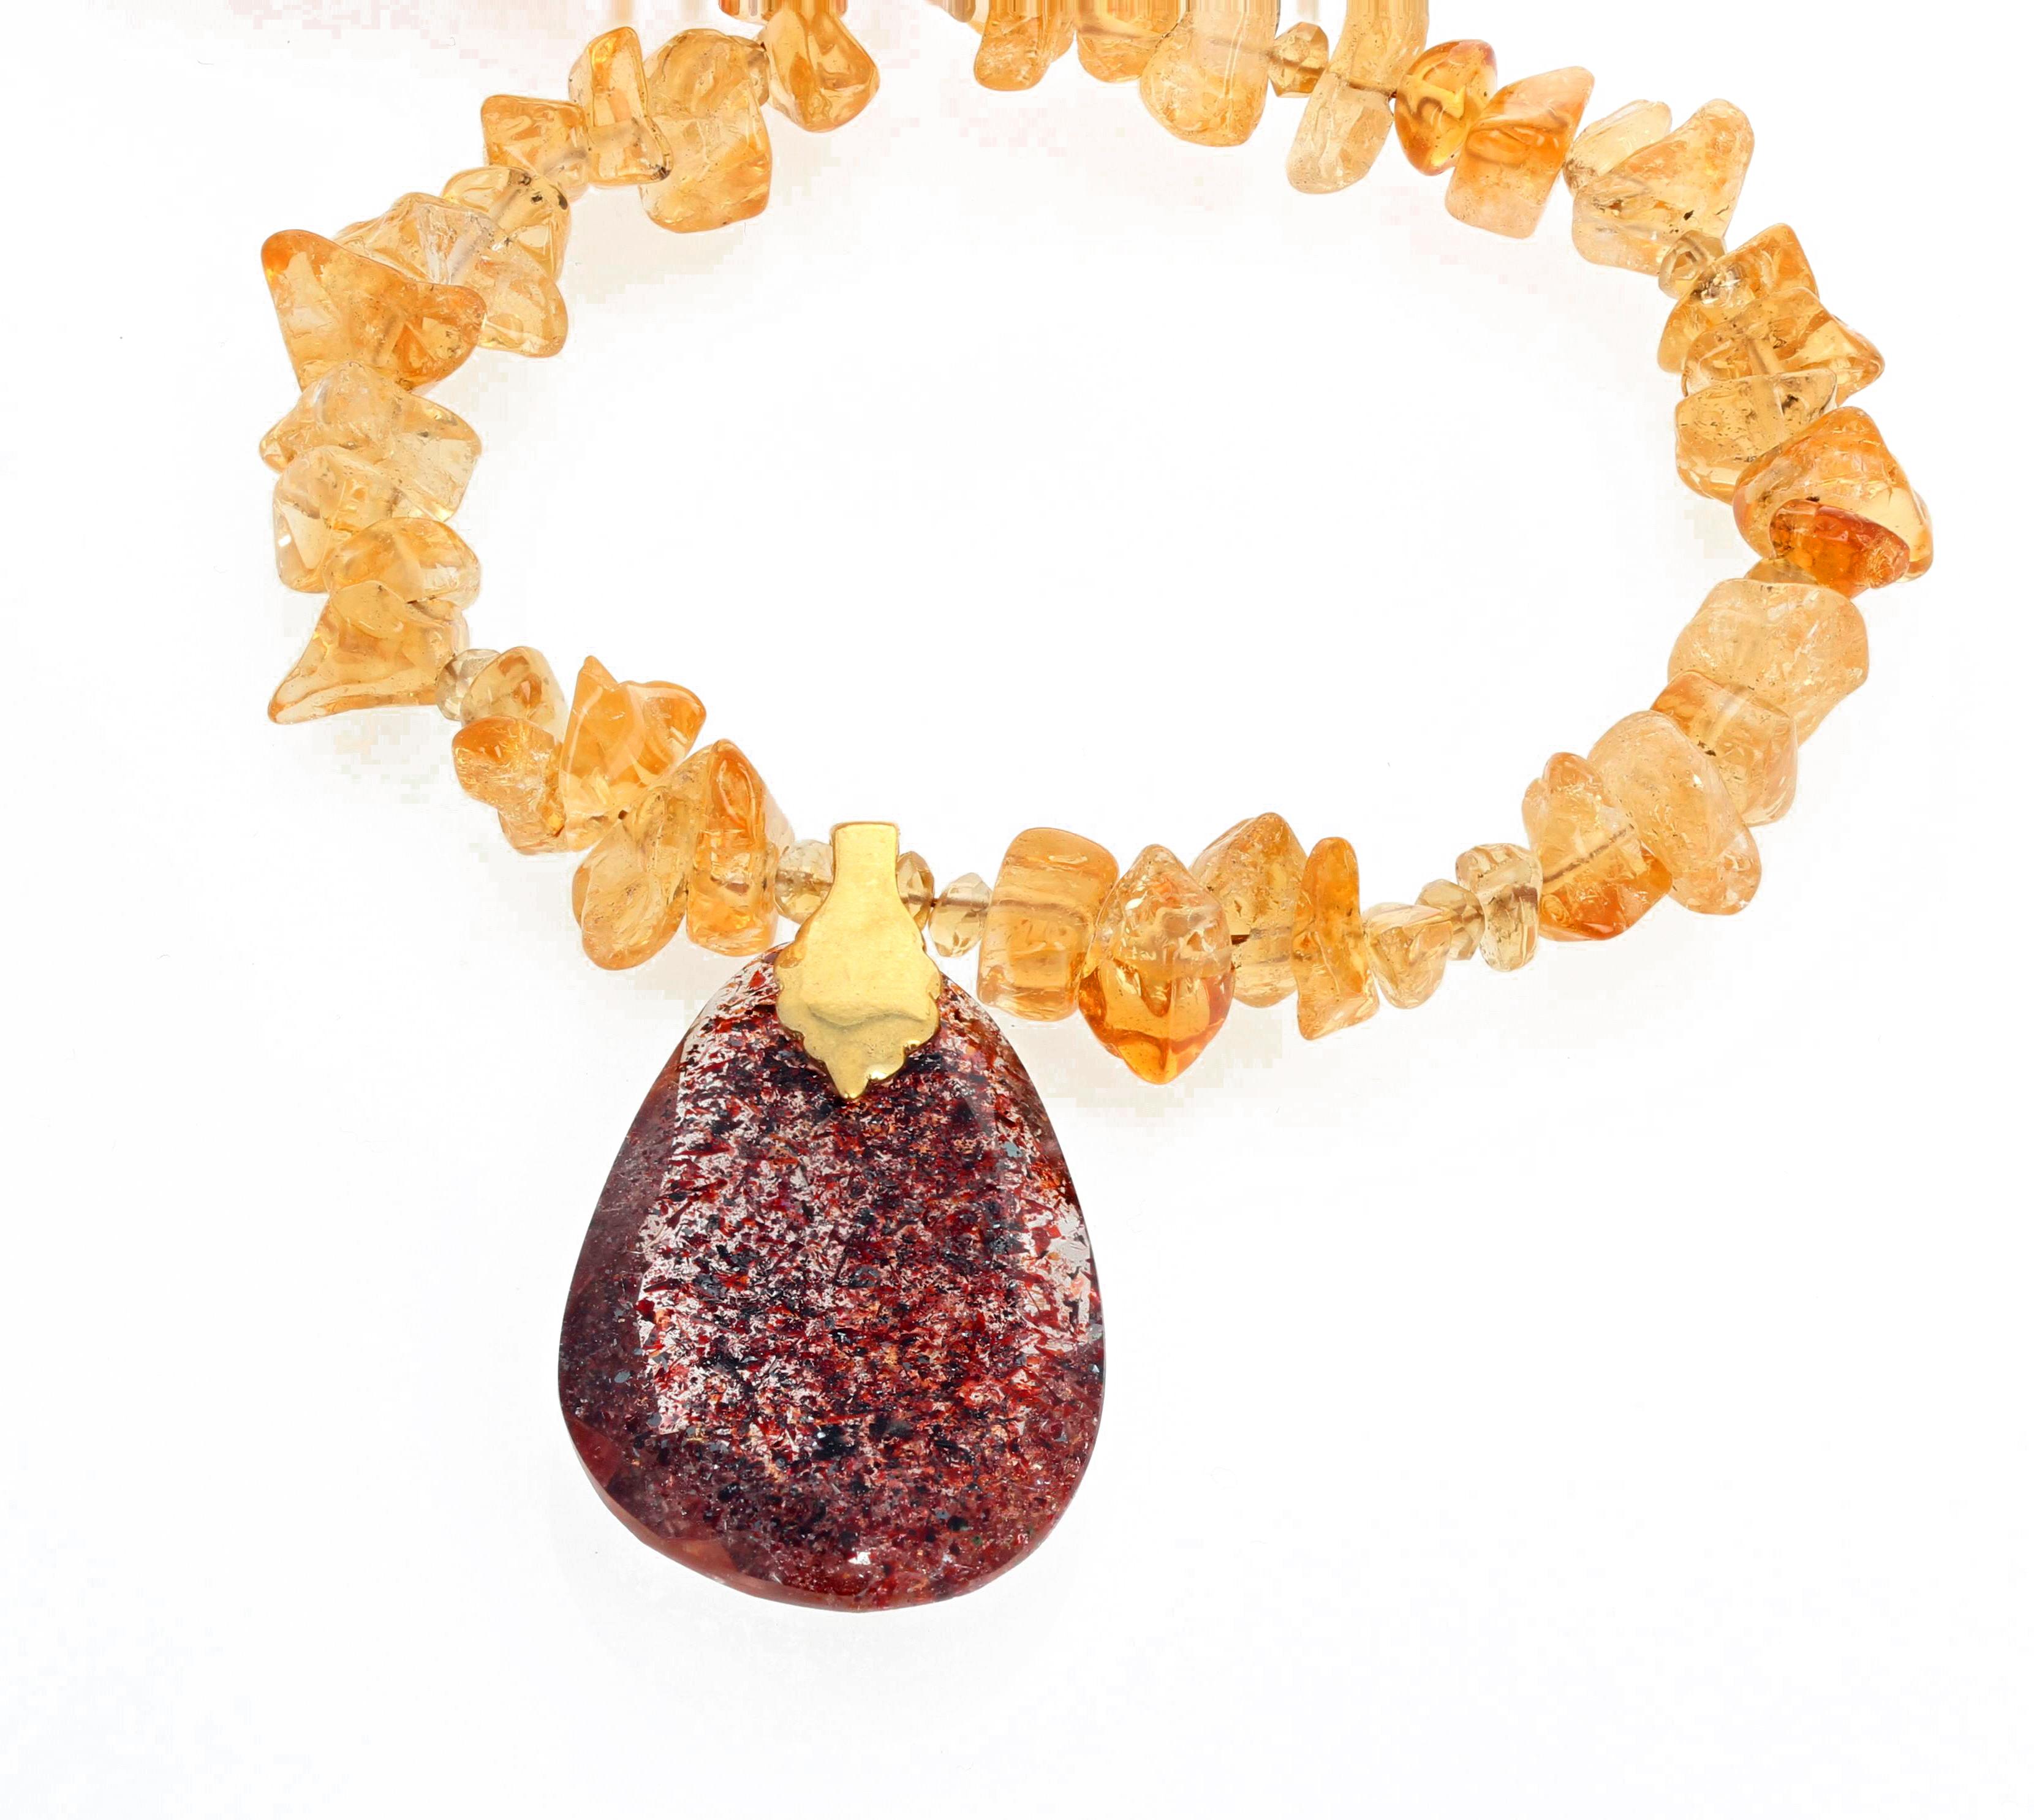 Unique glittering translucent strawberry/goldish Titanium pendant hangs from this lovely 19 inch necklace of chipped polished chunks of golden Citrines.   The Titanium measures 1 1/2 inches long.  